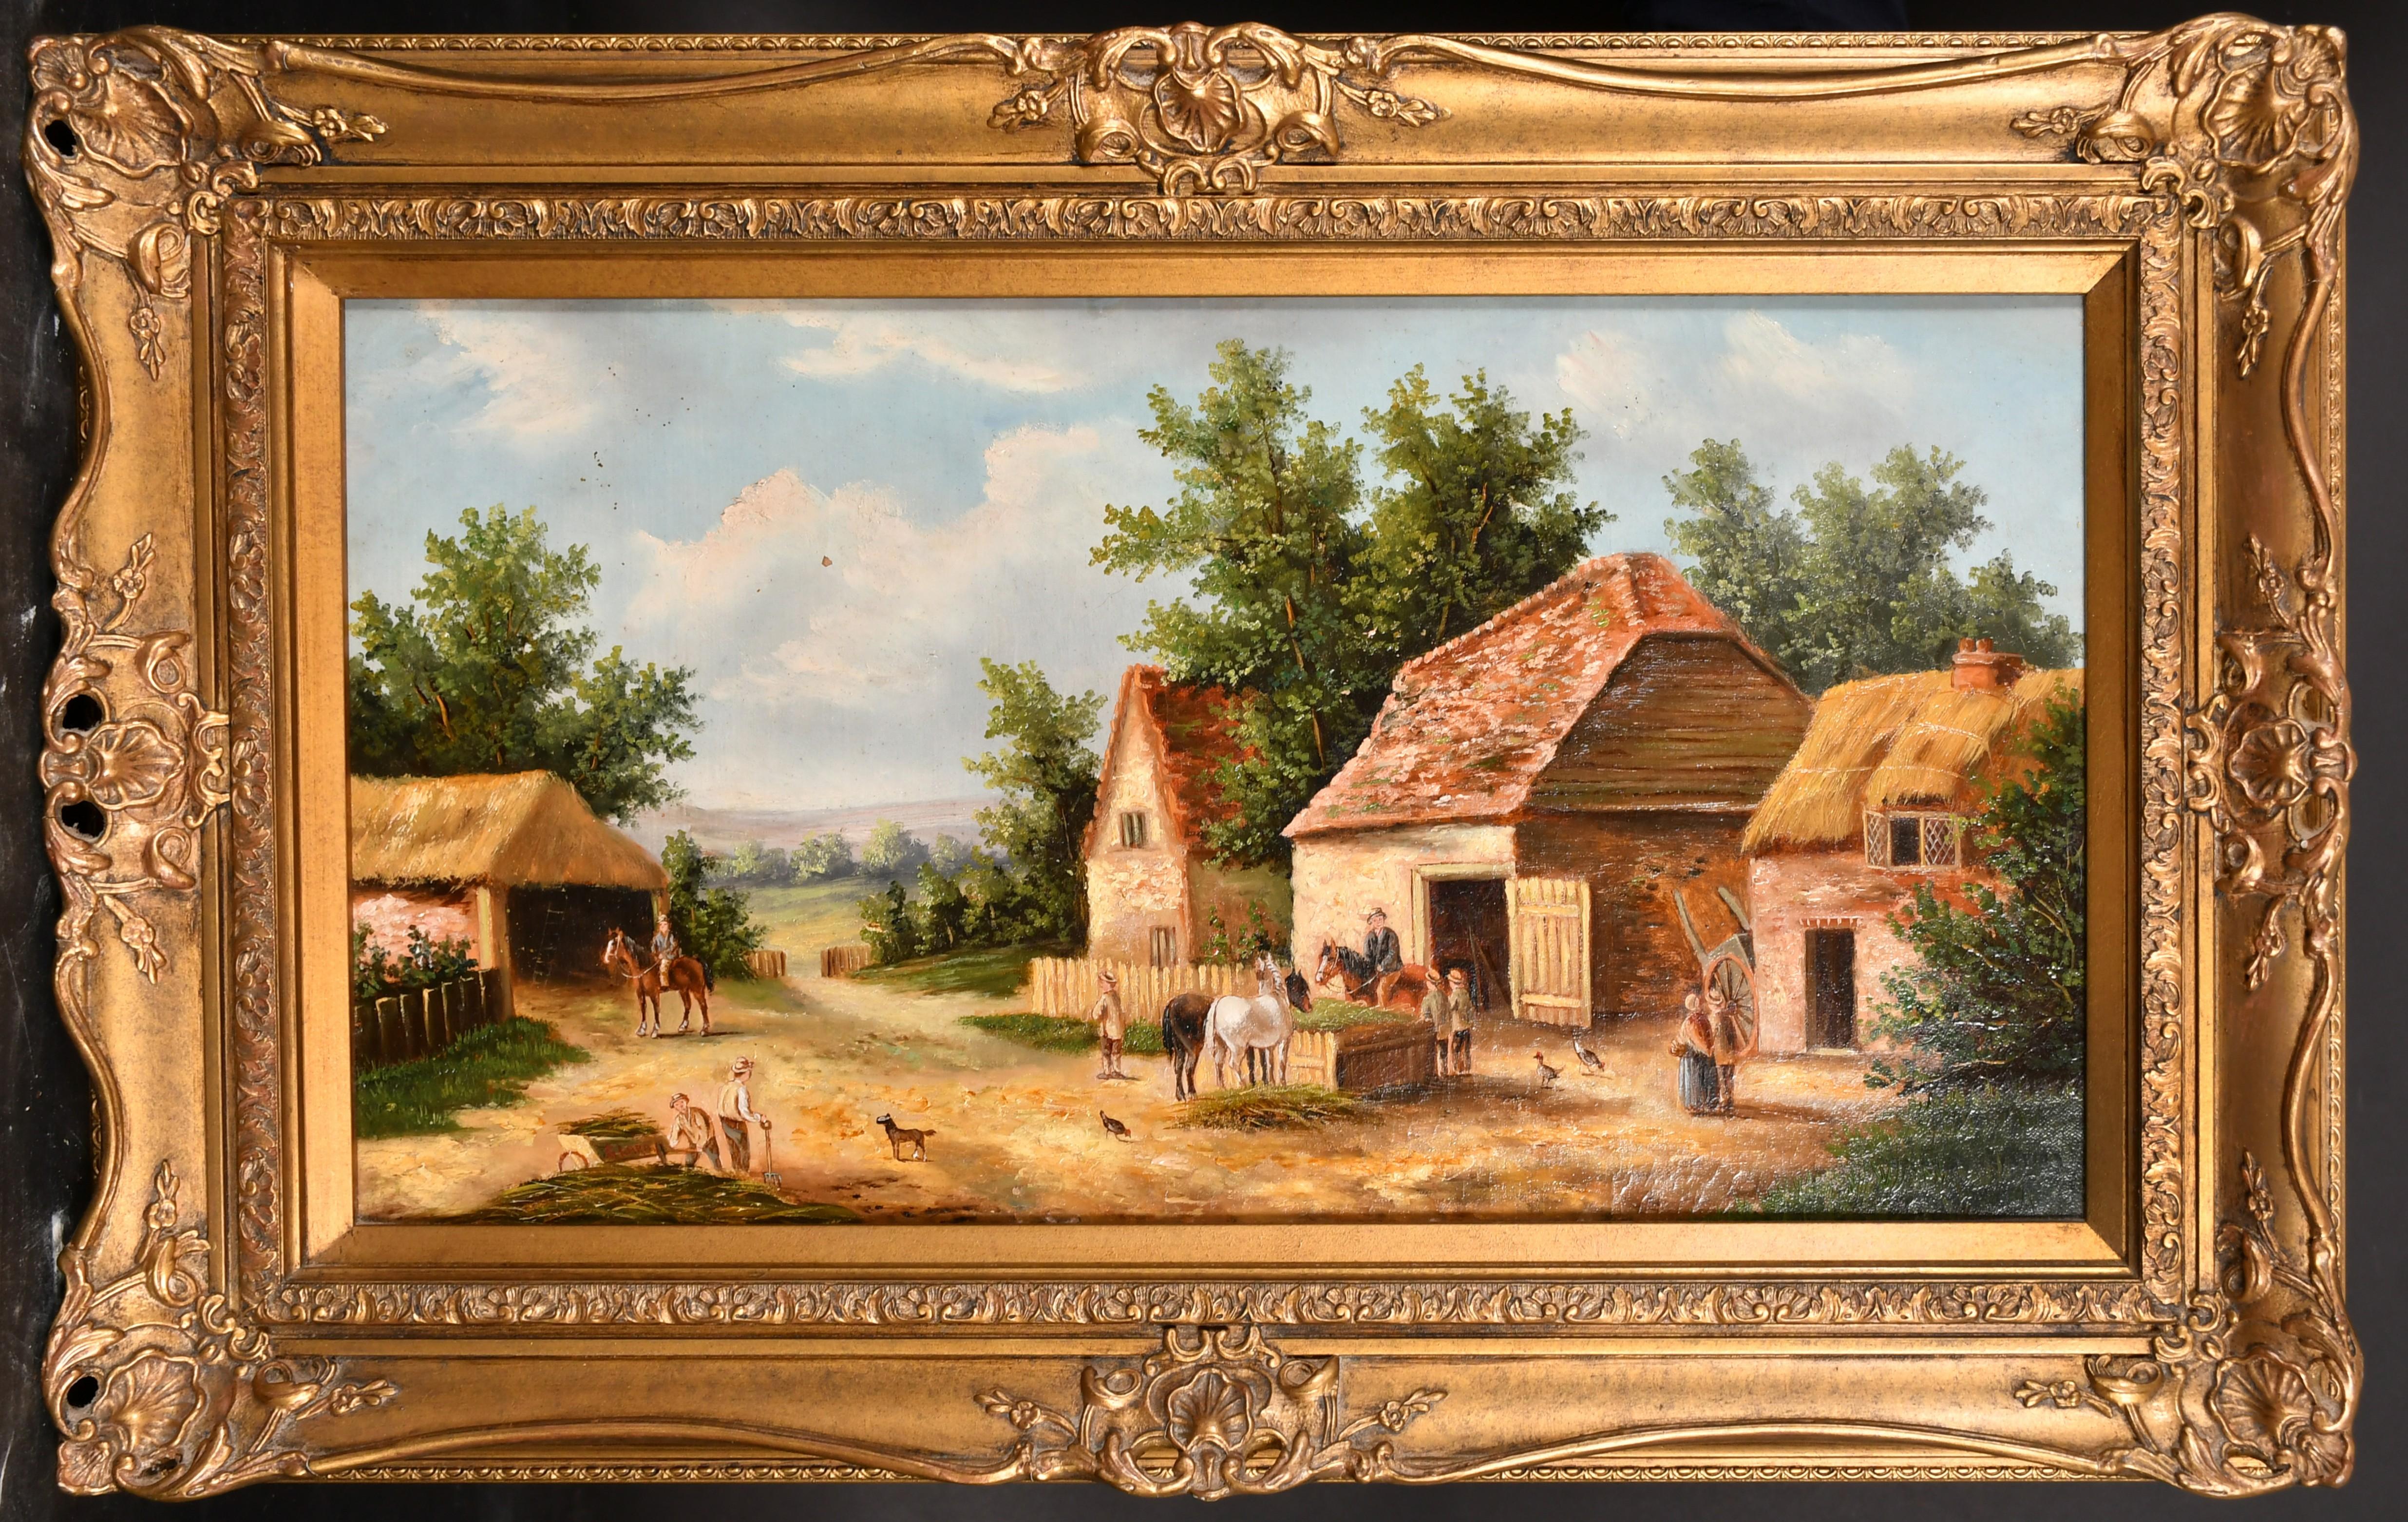 fine landscape oil painting of a farmyard scene by Georgina Lara (act.1840-1880) British.
Oil on canvas,housed in a gilt frame. Signed, and inscribed on a label verso,
The overall size being 69 x 45 cm whilst the image is 29 x 54 cm
In very good